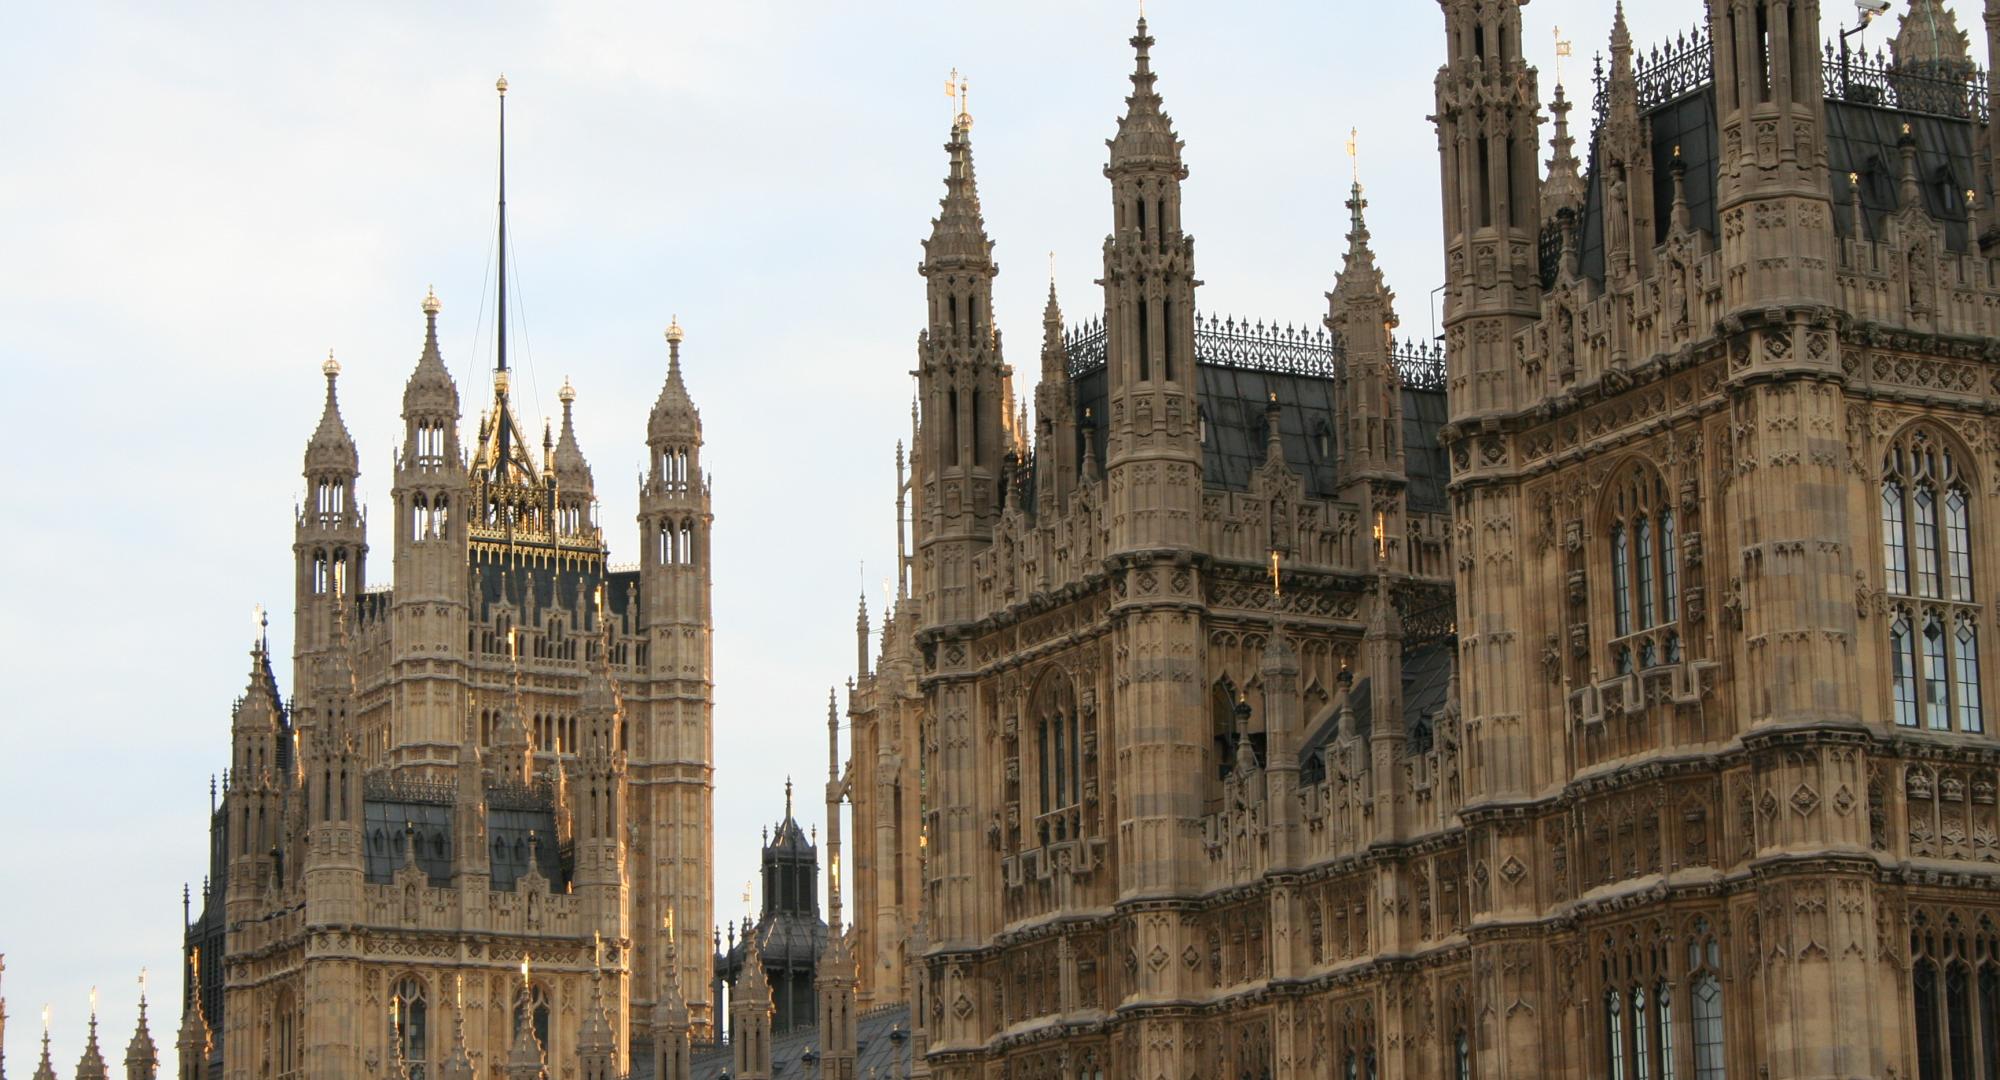 The Houses of Parliament, The Palace of Westminster.